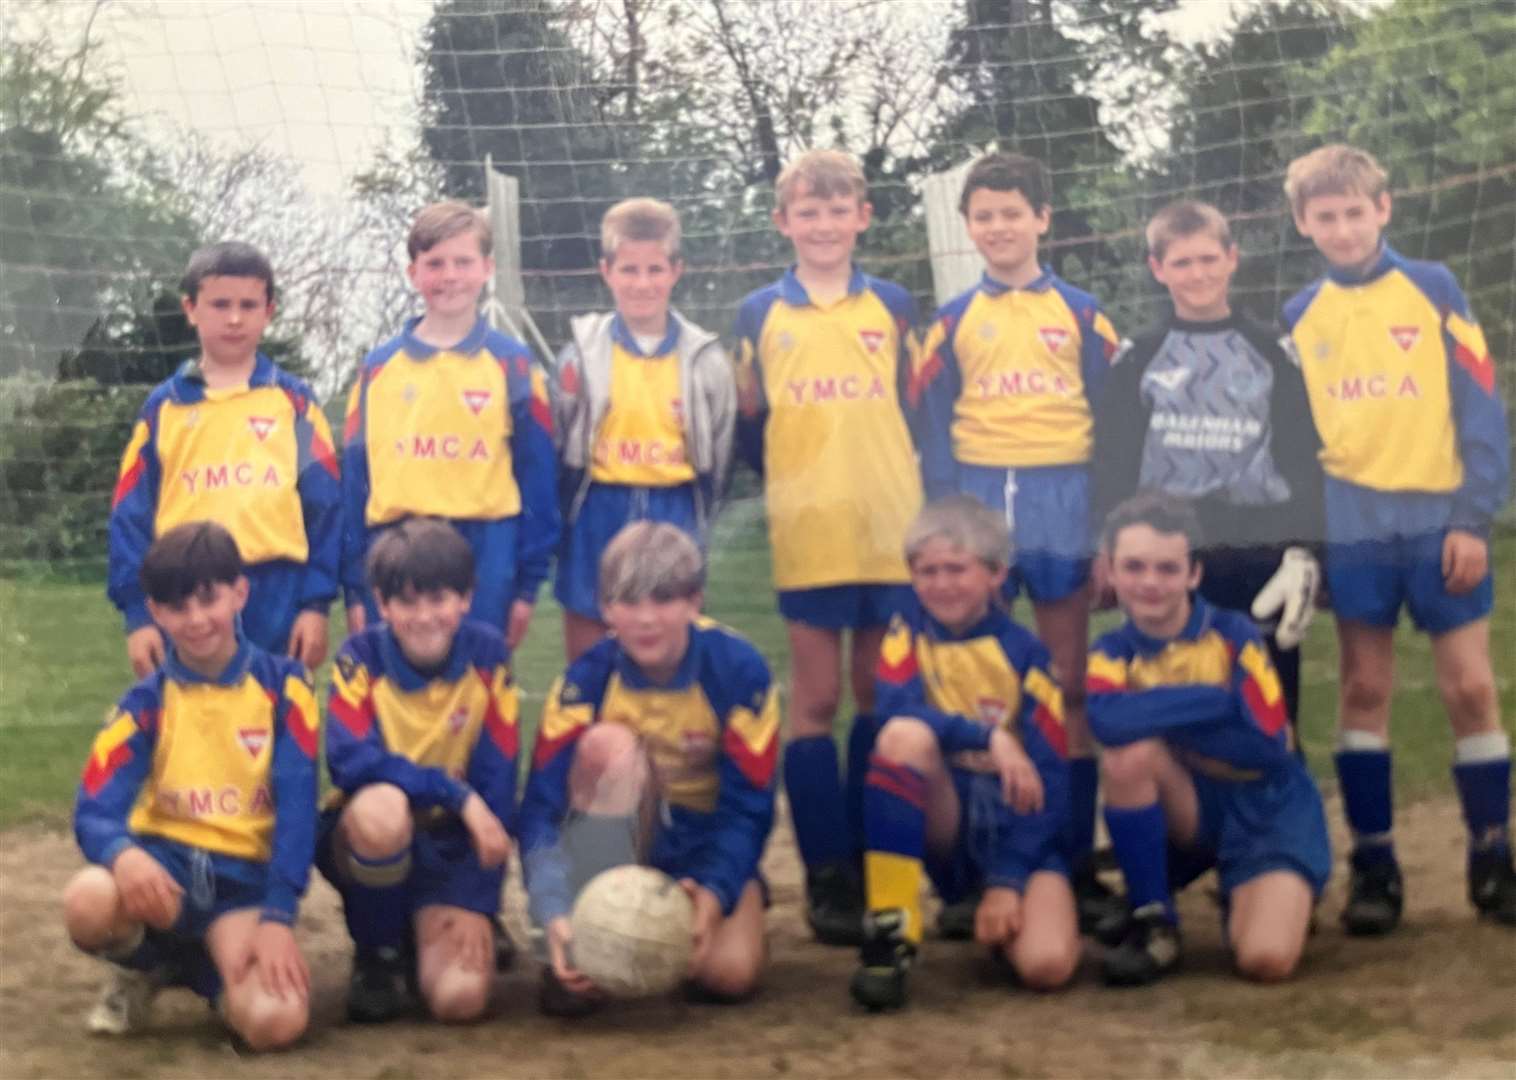 The friends played football together (Damien Clarkson second from back left and John Rendle second from left front). Photo credit: Damien Clarkson